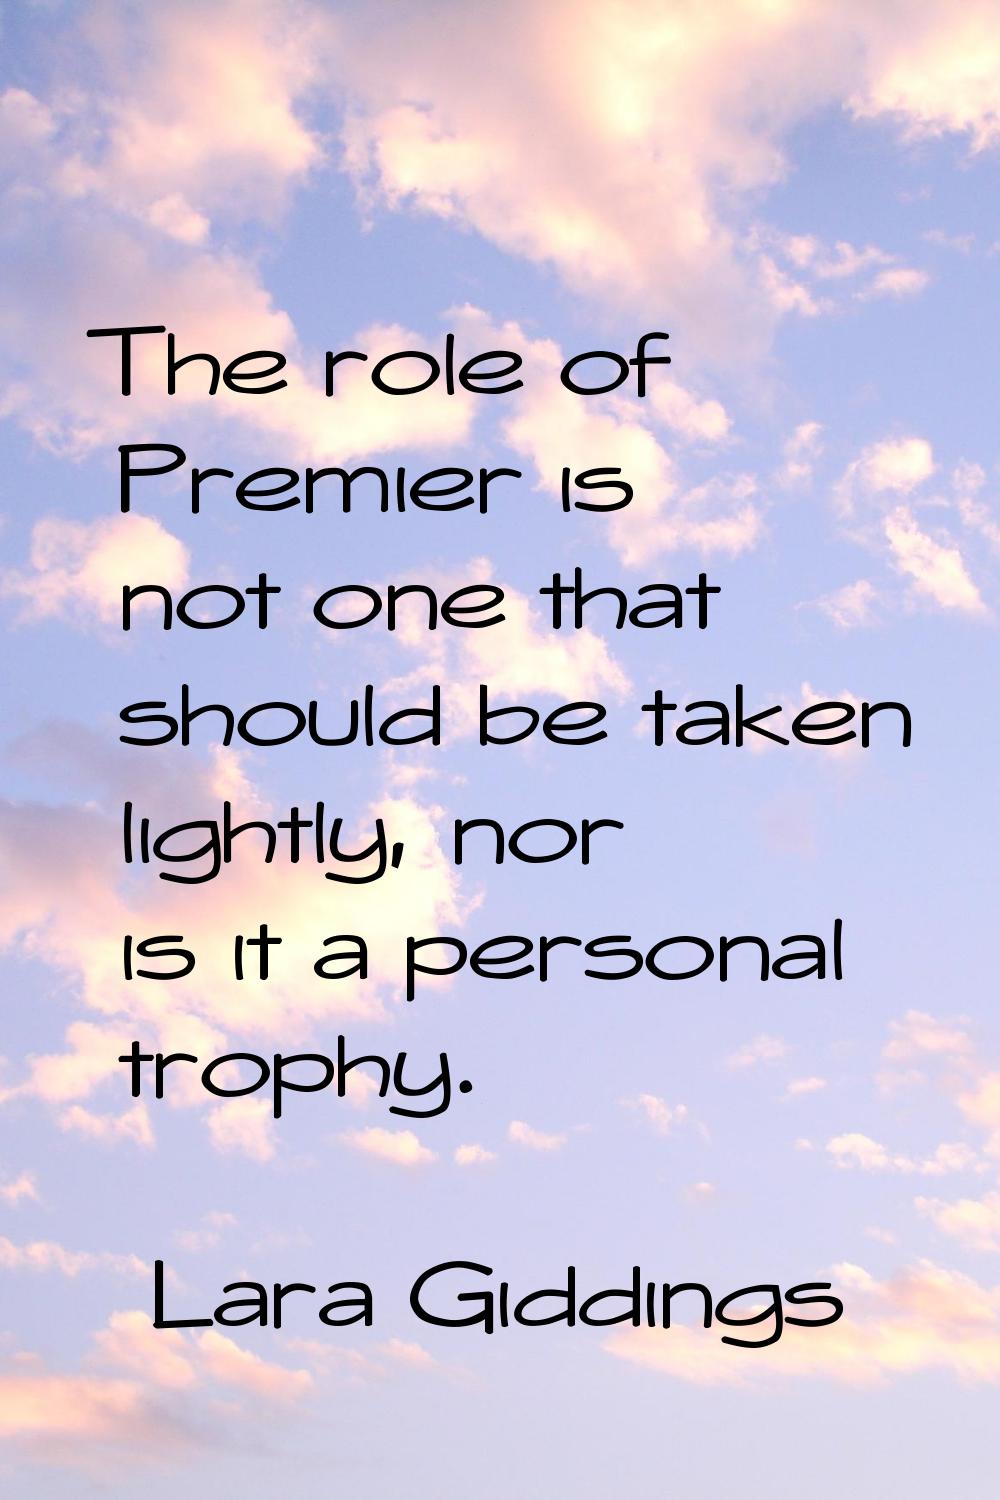 The role of Premier is not one that should be taken lightly, nor is it a personal trophy.